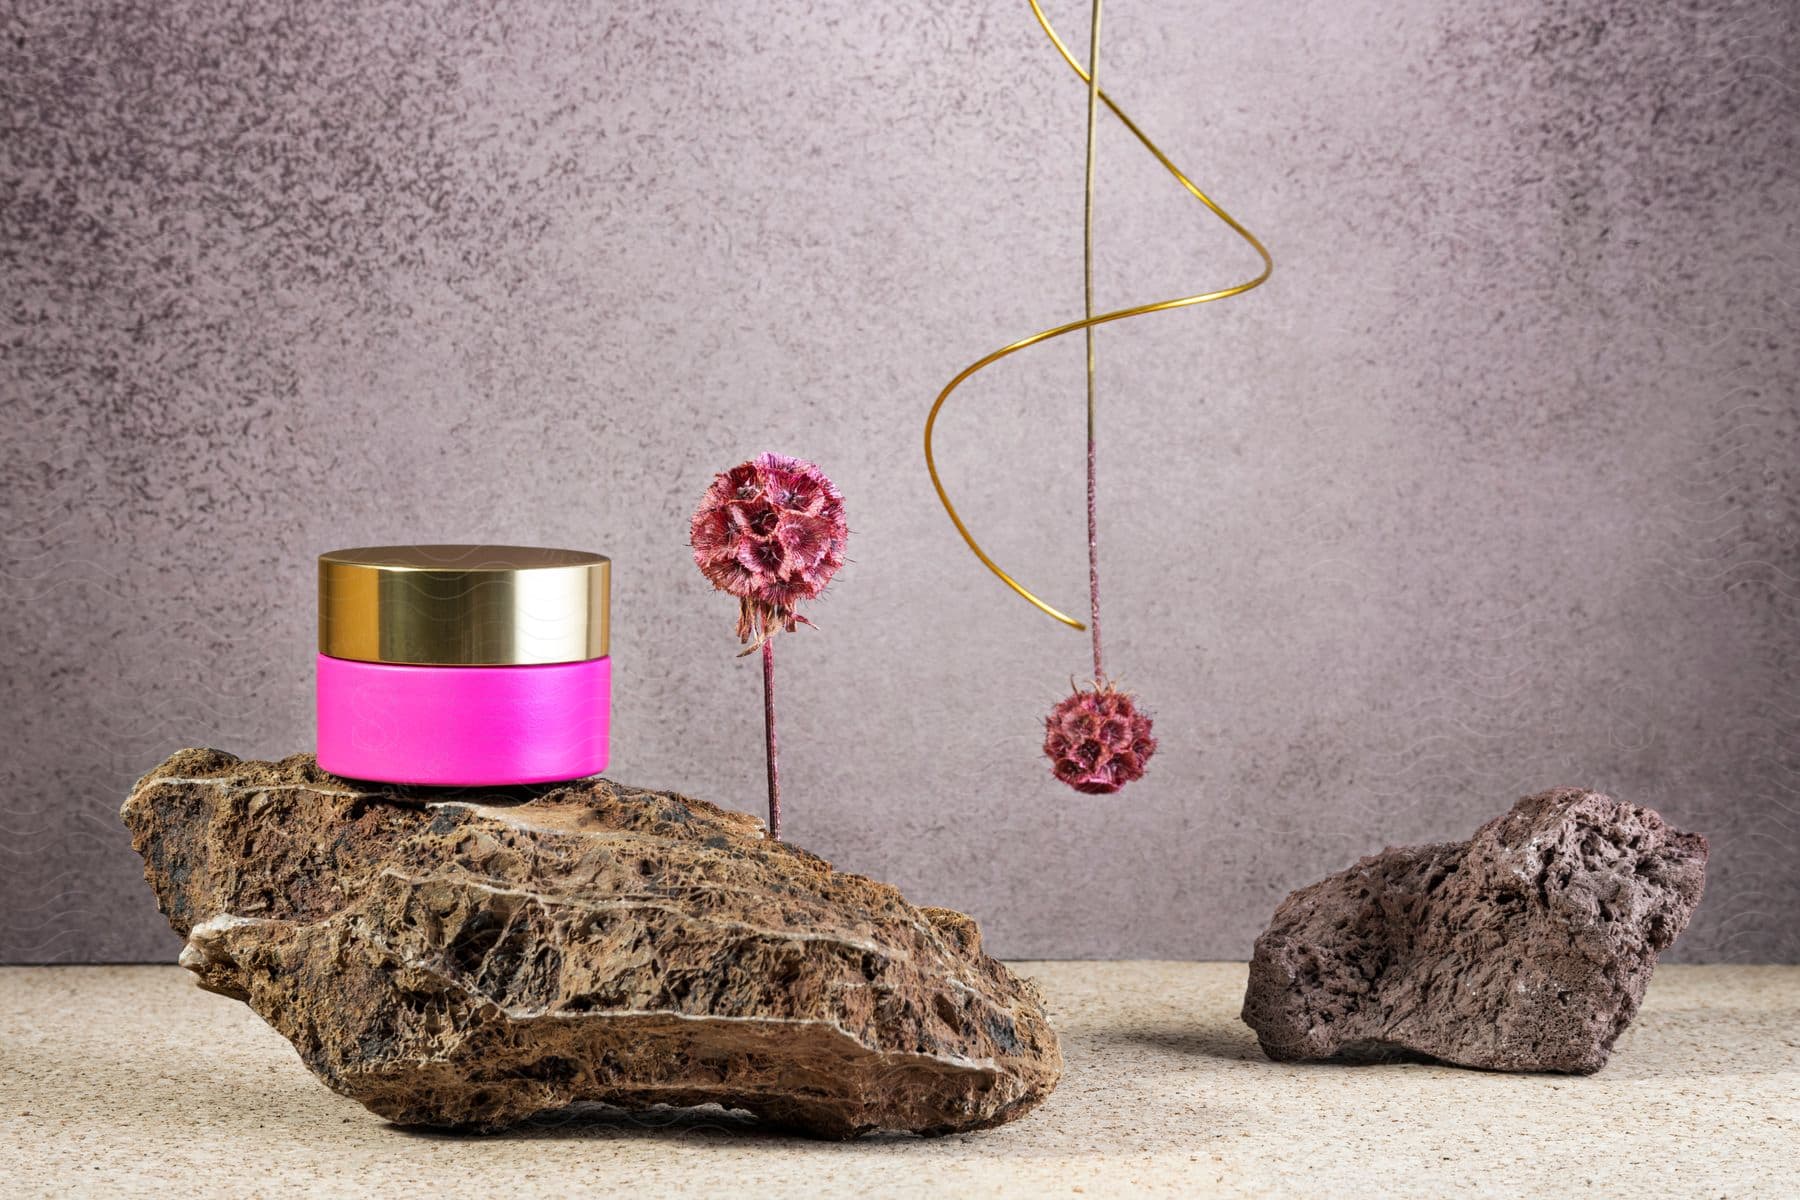 A pink container with a lid sits on a smooth, gray rock.